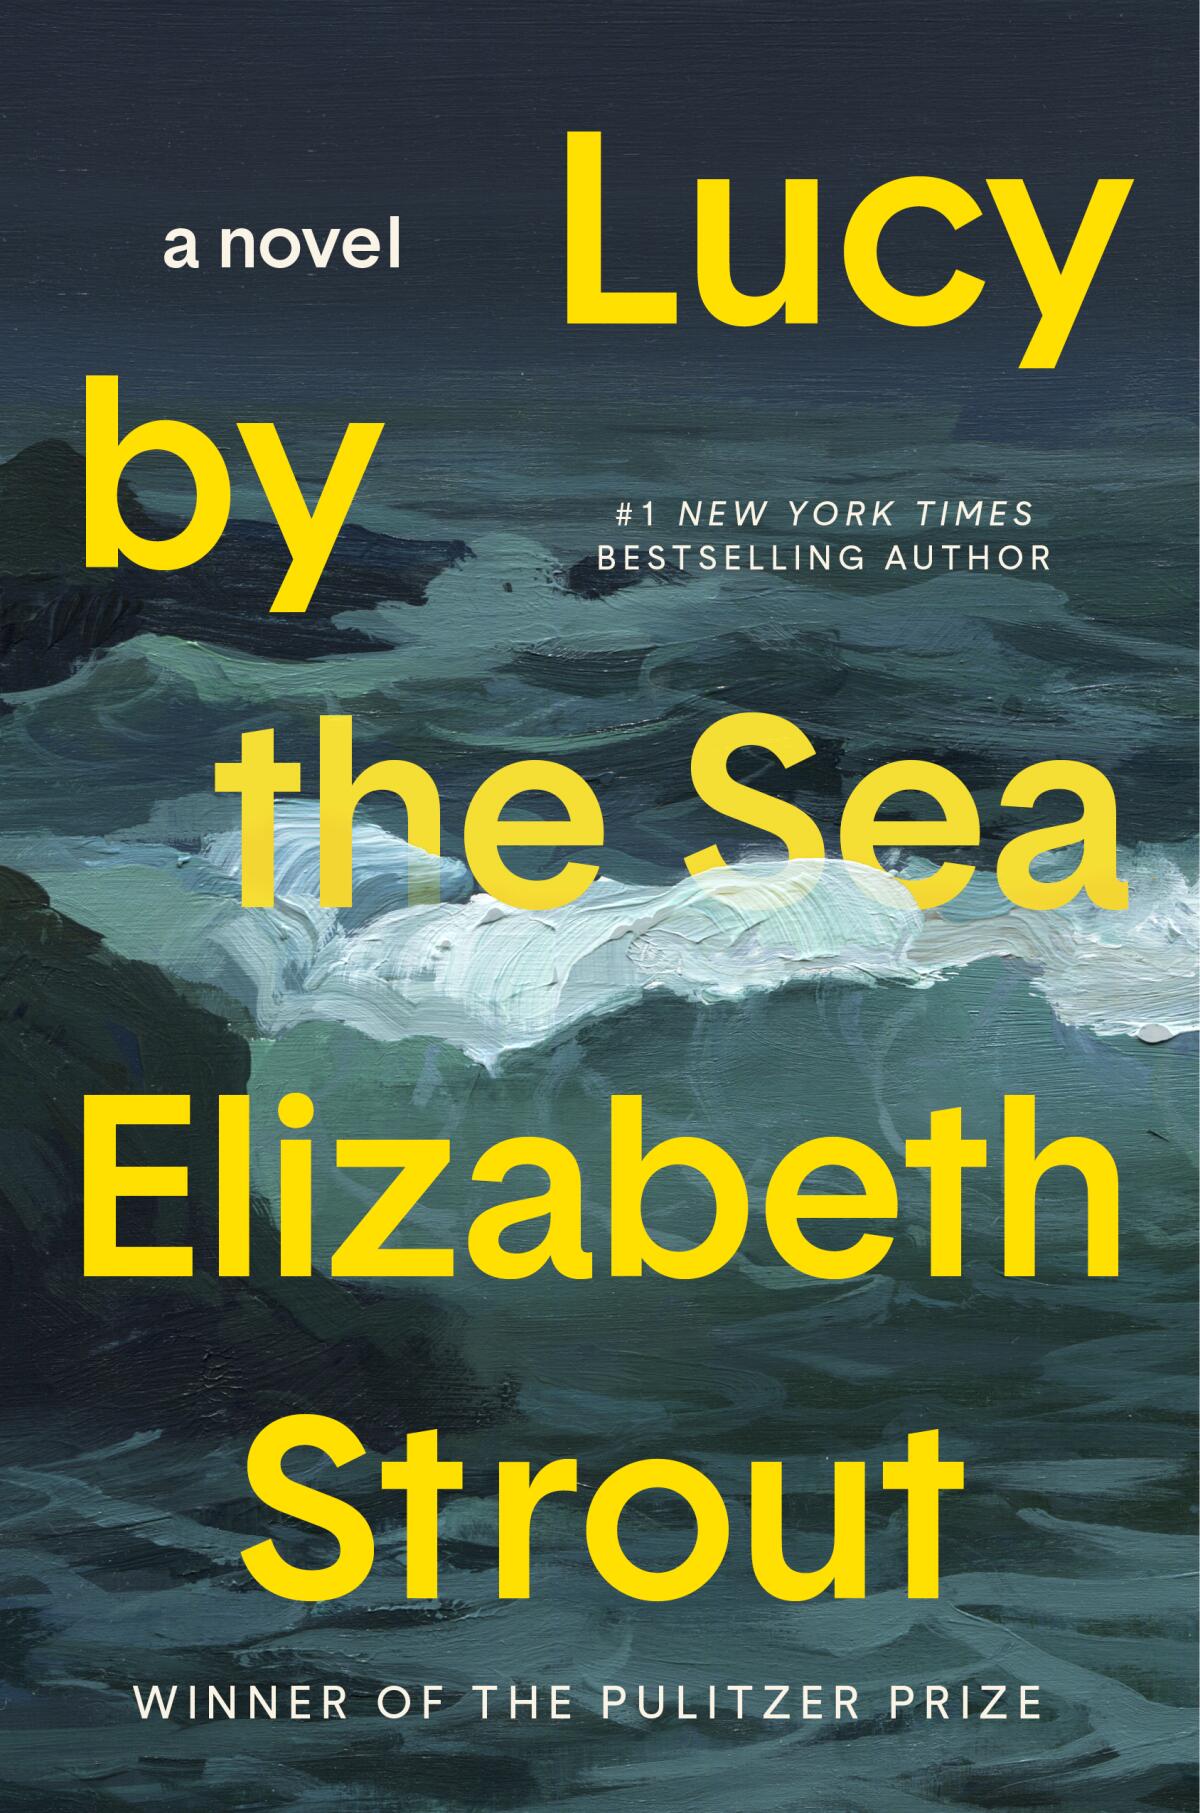 "Lucy by the Sea: A Novel" by Elizabeth Strout